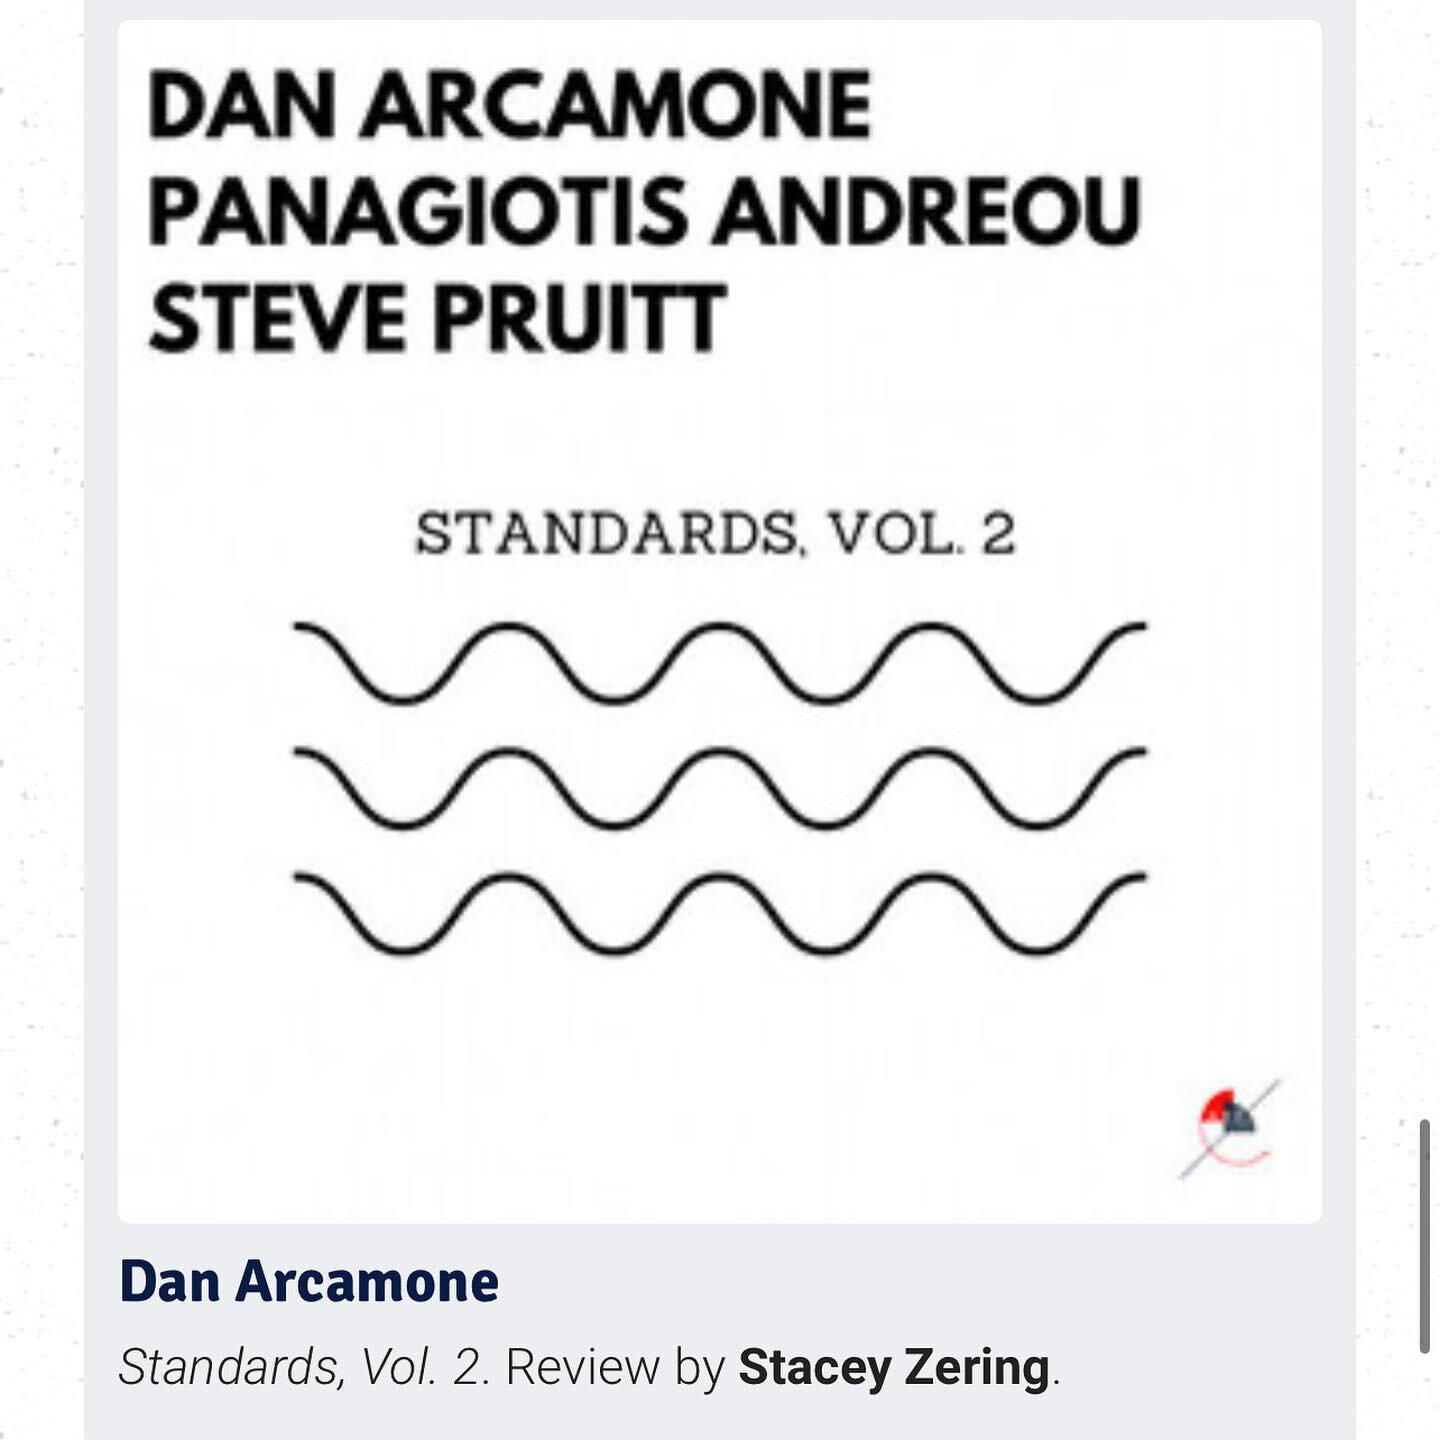 Latest review of Standards, Vol. 2 at ink19.com